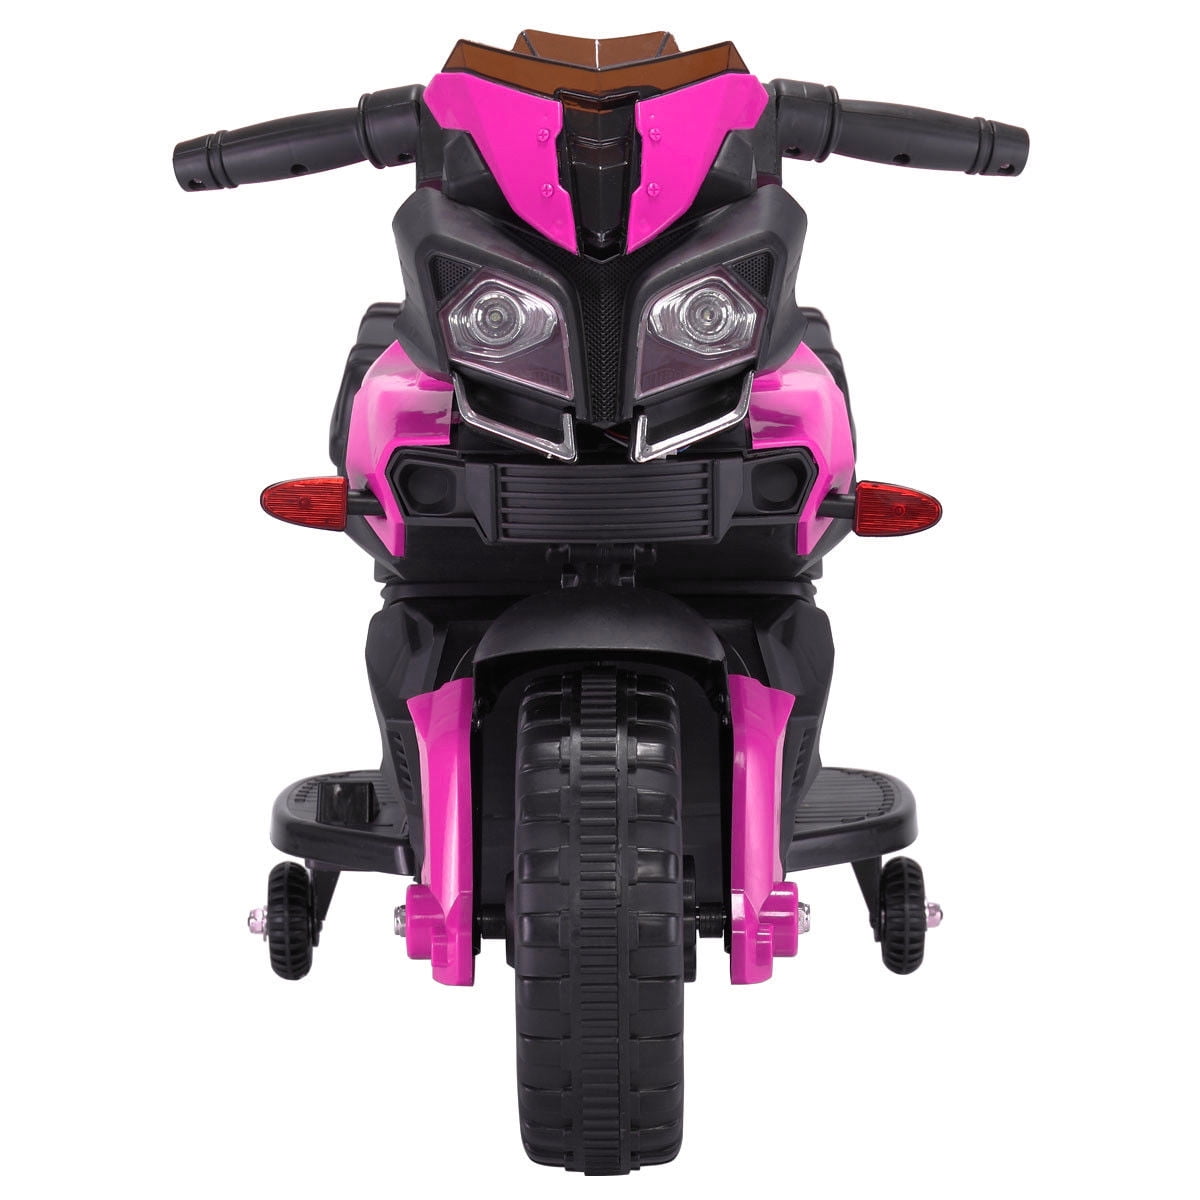 Topcobe Kids Electric Battery-Powered Ride-On Motorcycle Dirt Bike Toy With 4 Wheels, Gifts for Children Girls Boys, Pink